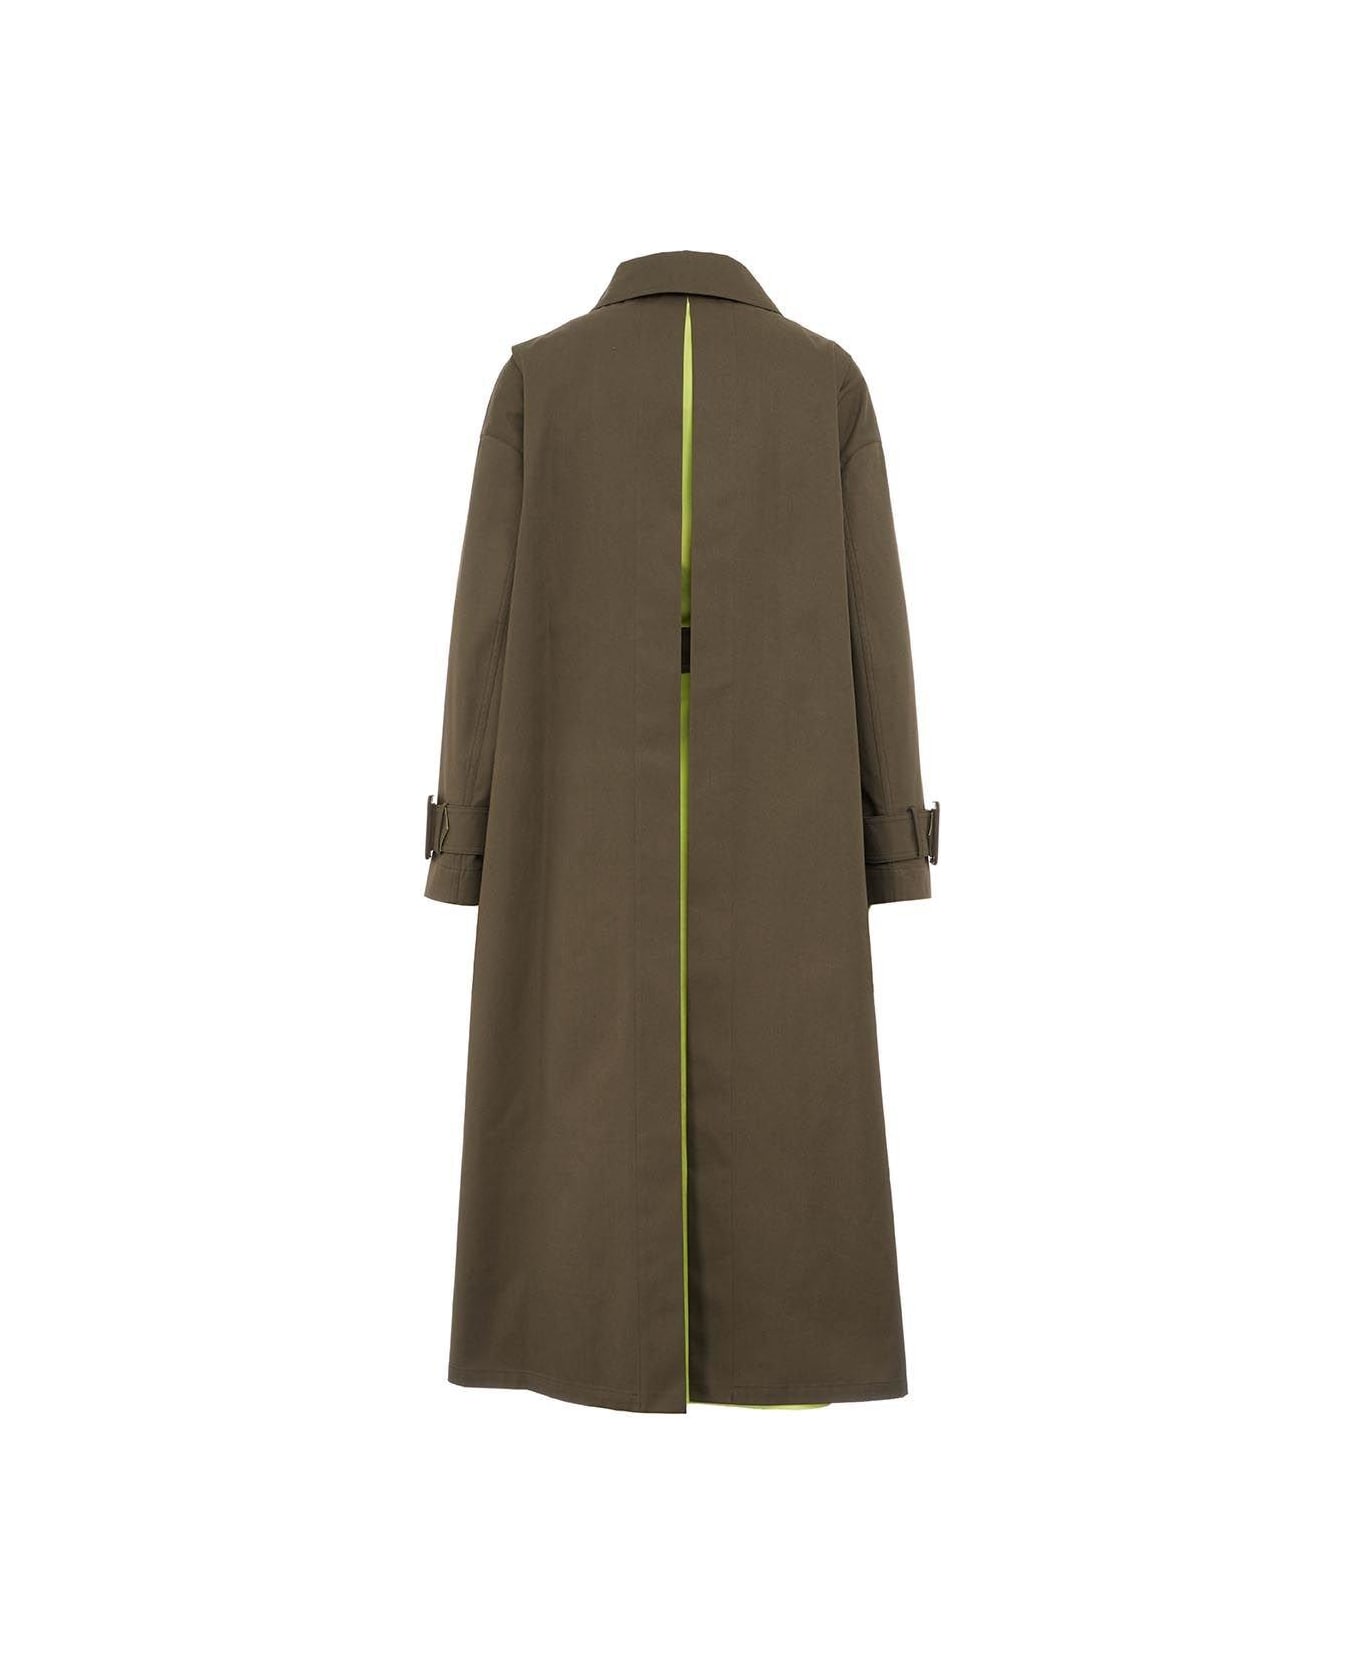 Herno Belted Trench Coat - Light military